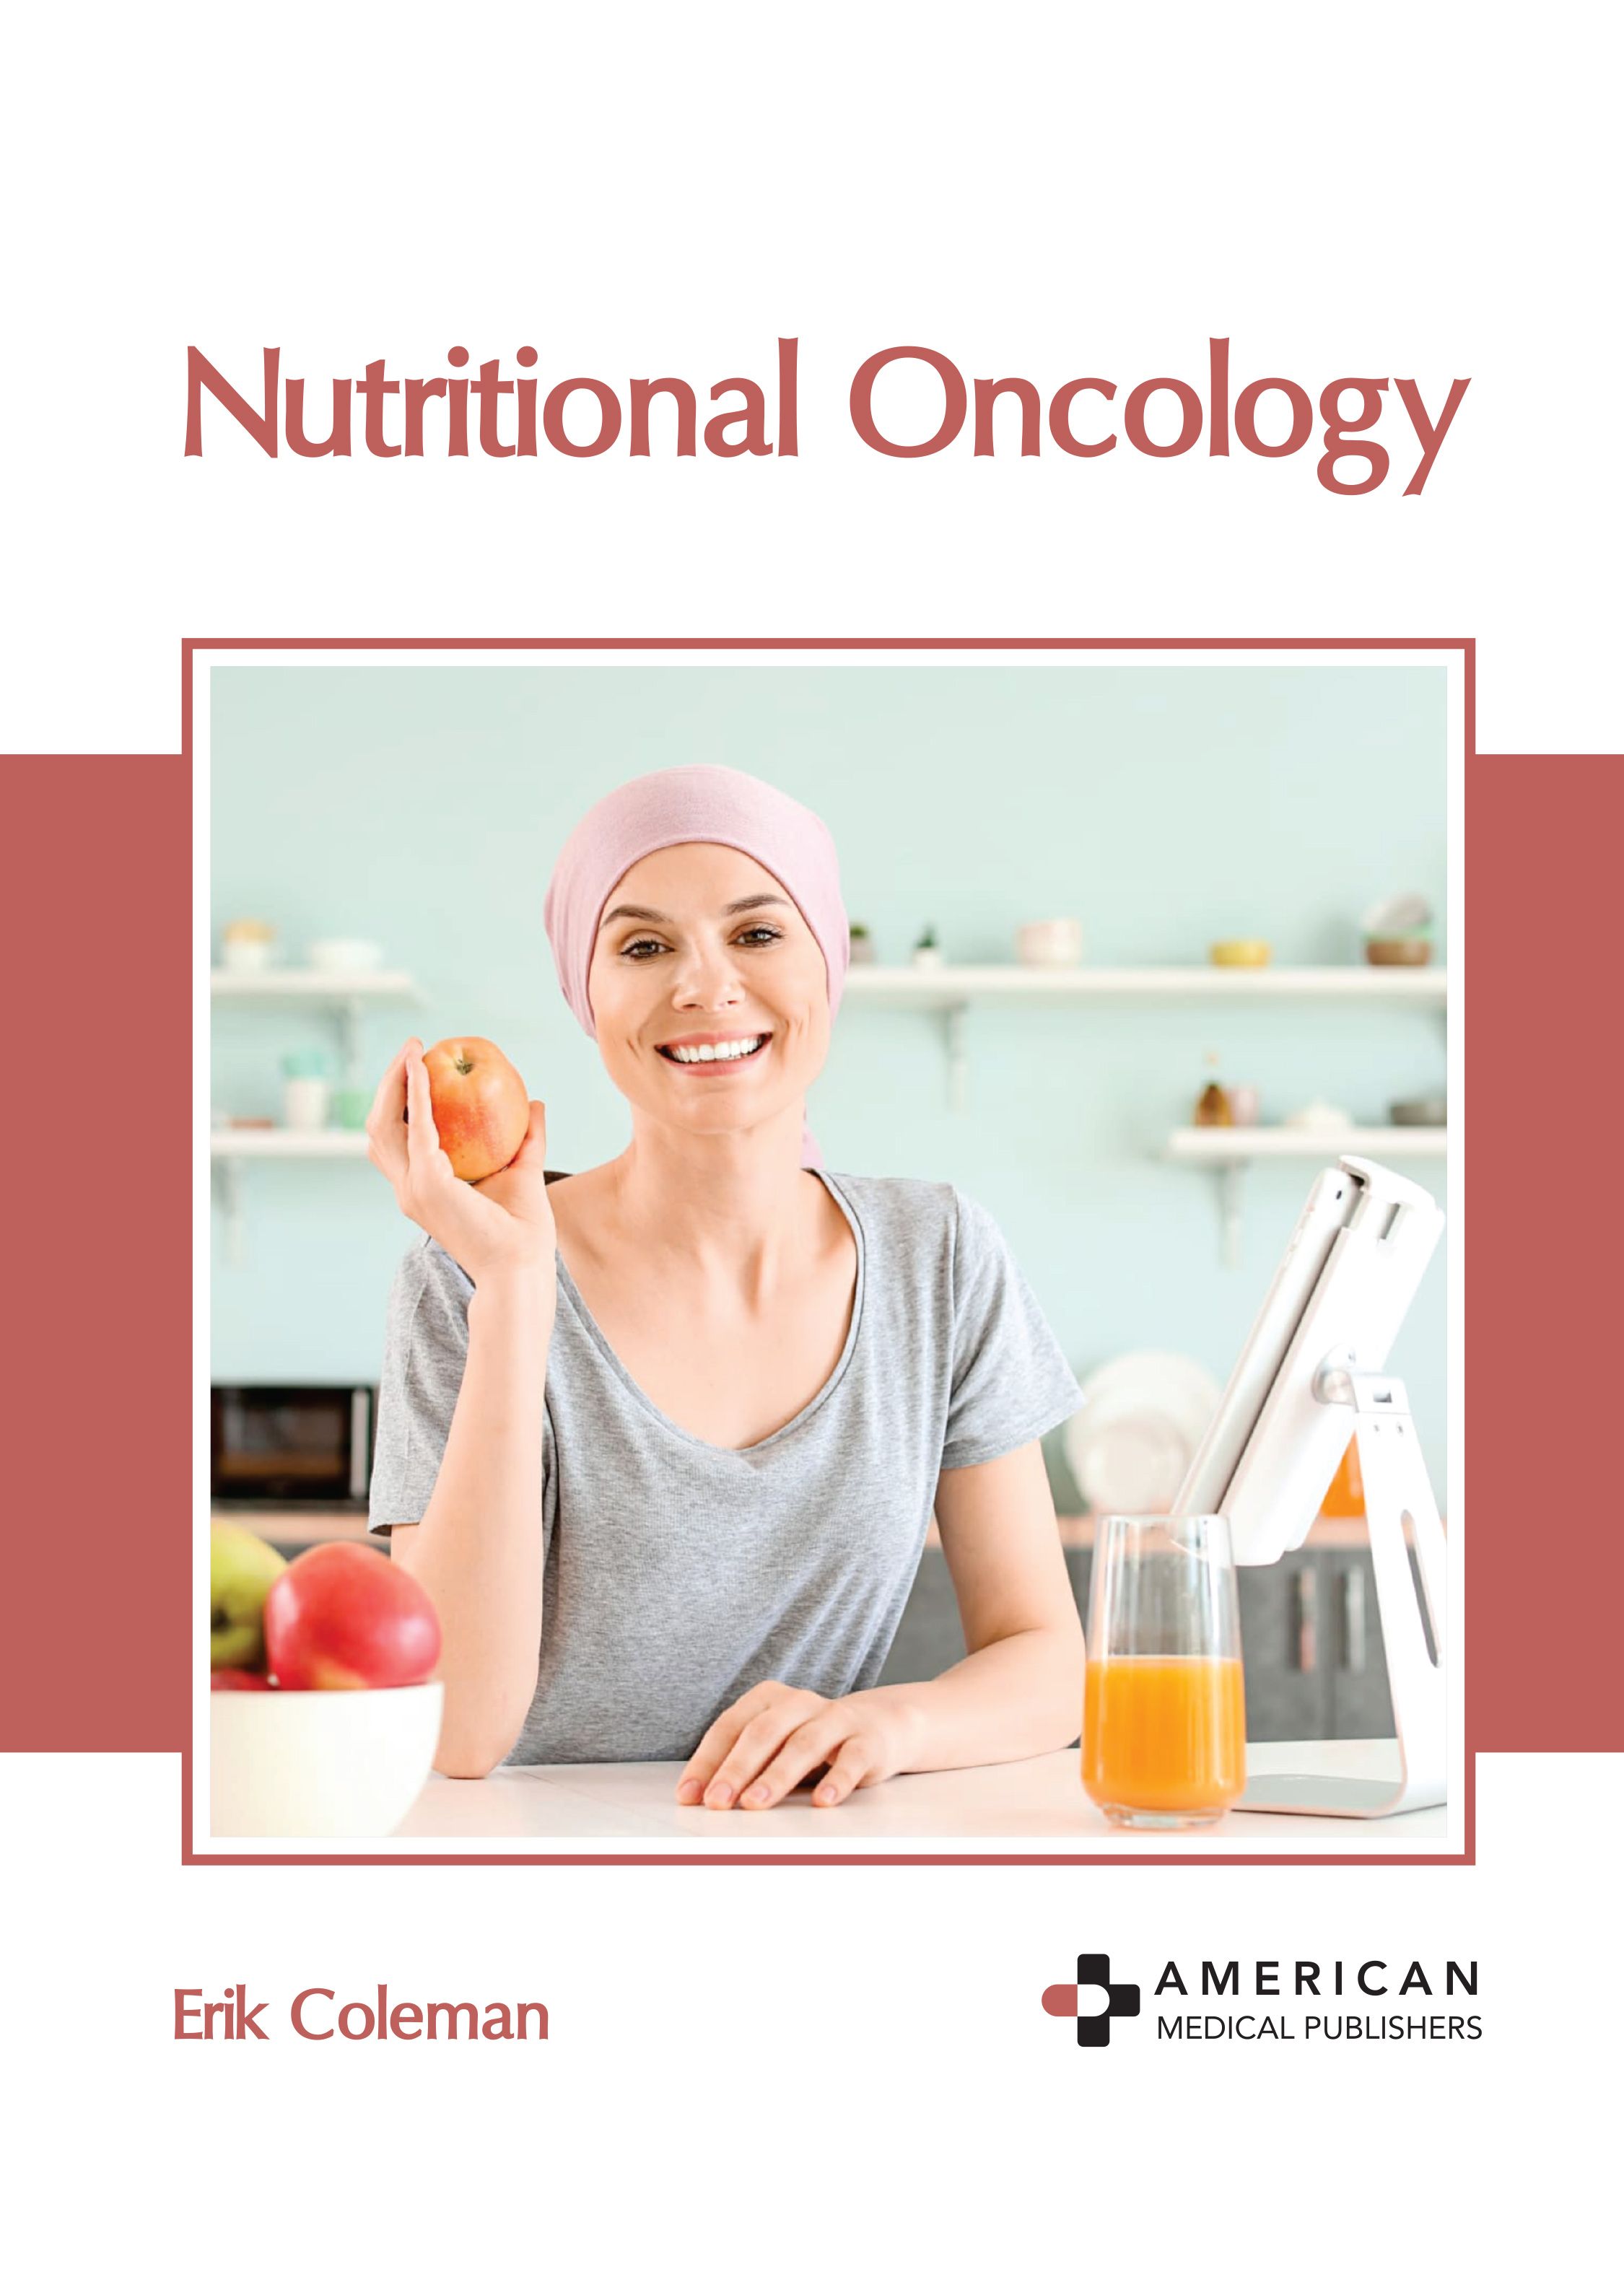 NUTRITIONAL ONCOLOGY